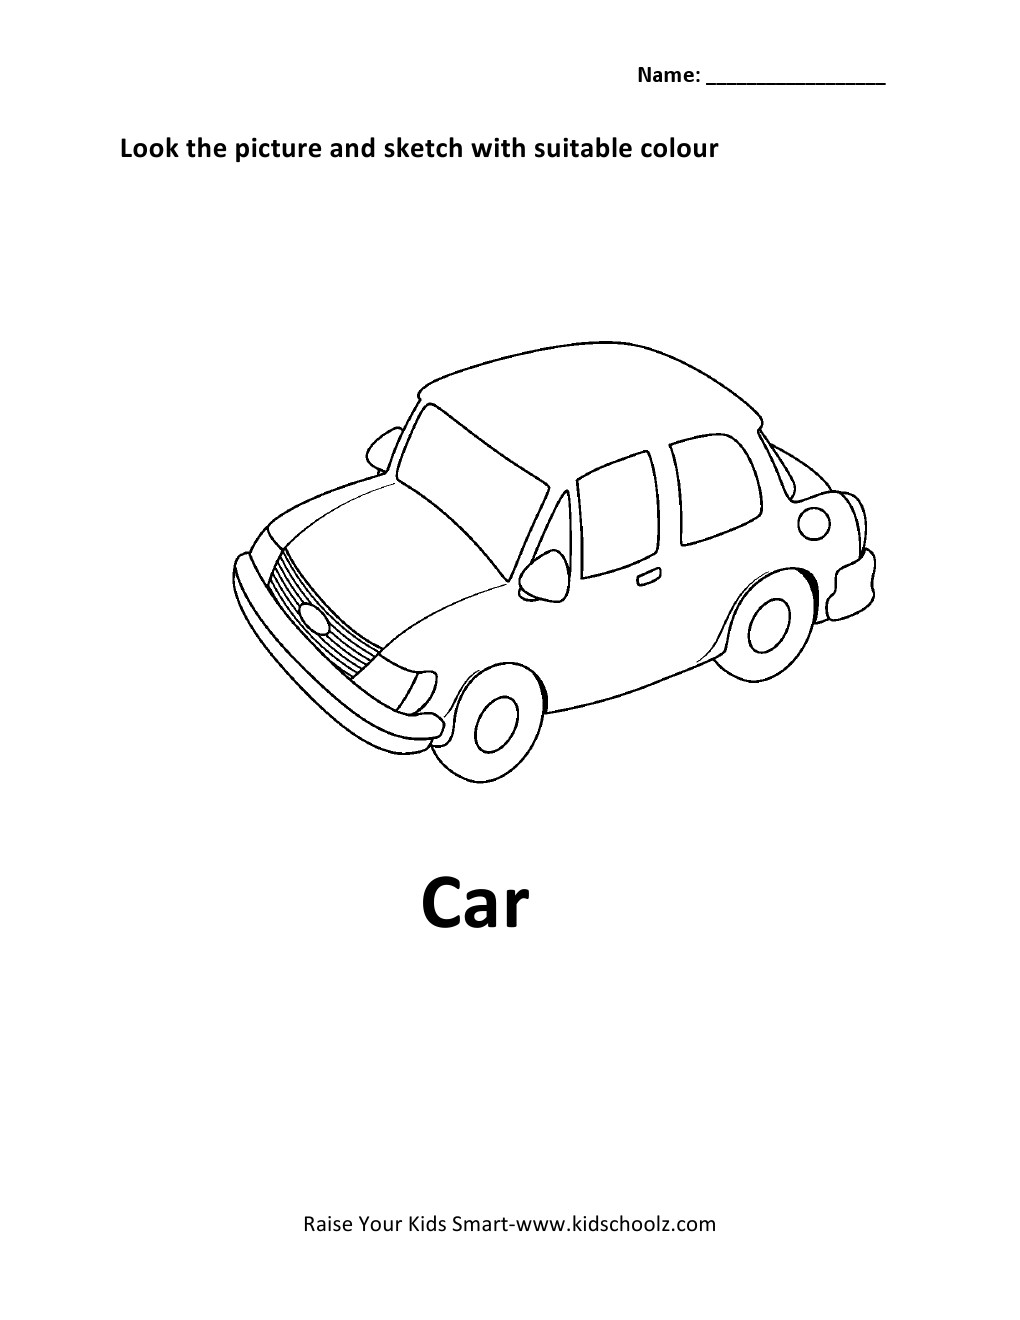 10 Best Images of Free Printable Worksheets On Cars - Printable Color